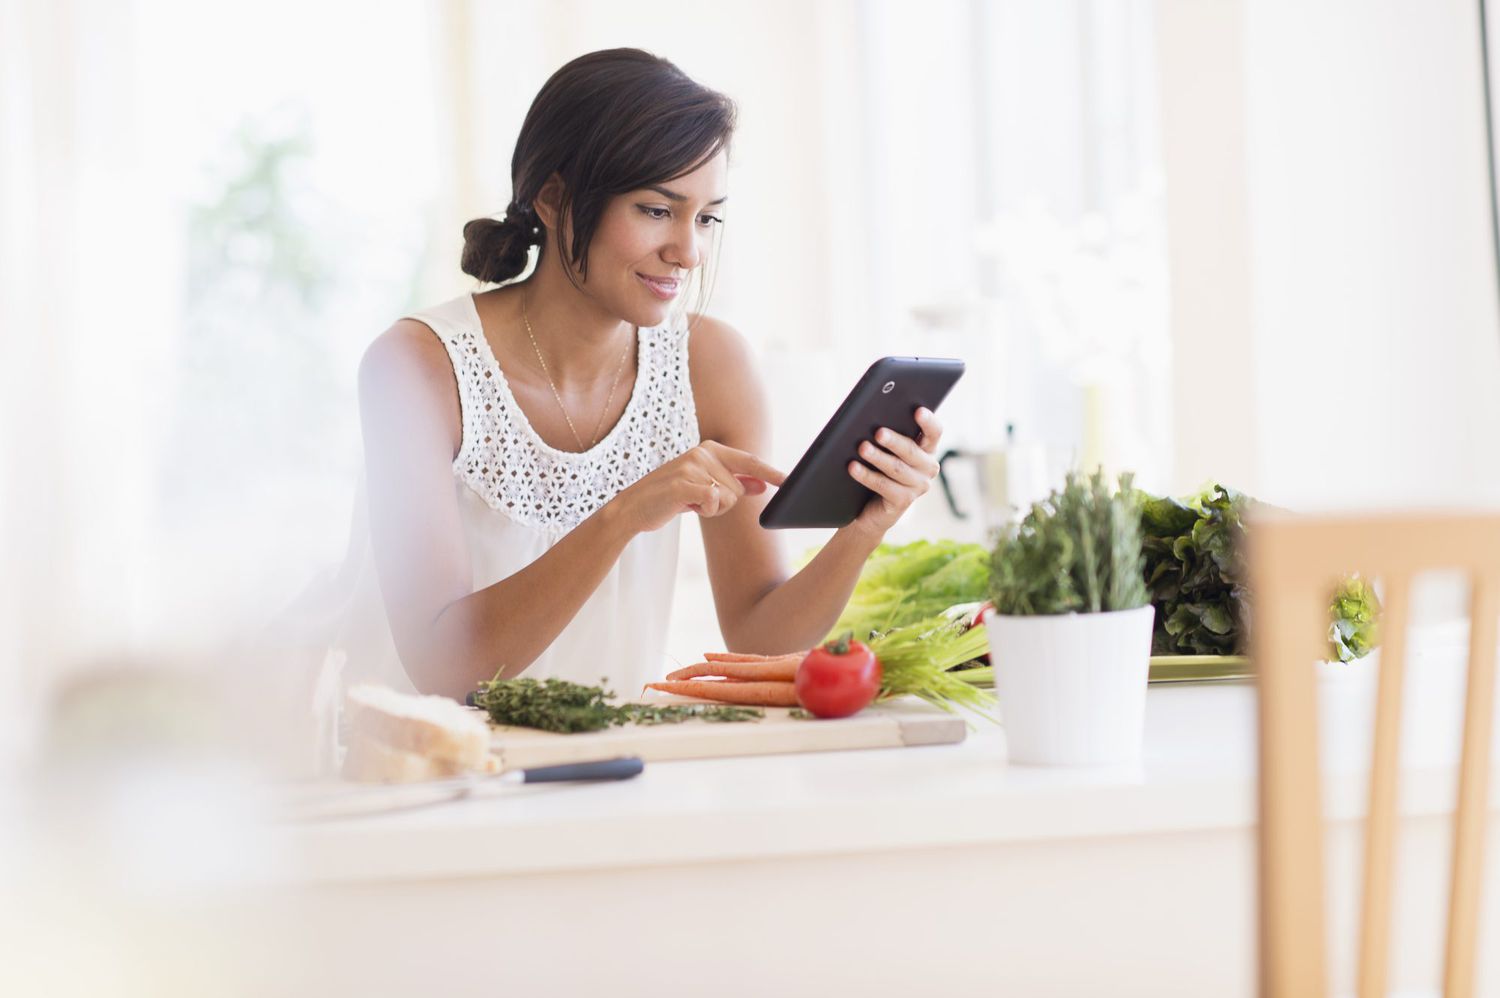 Hispanic woman cooking with digital tablet